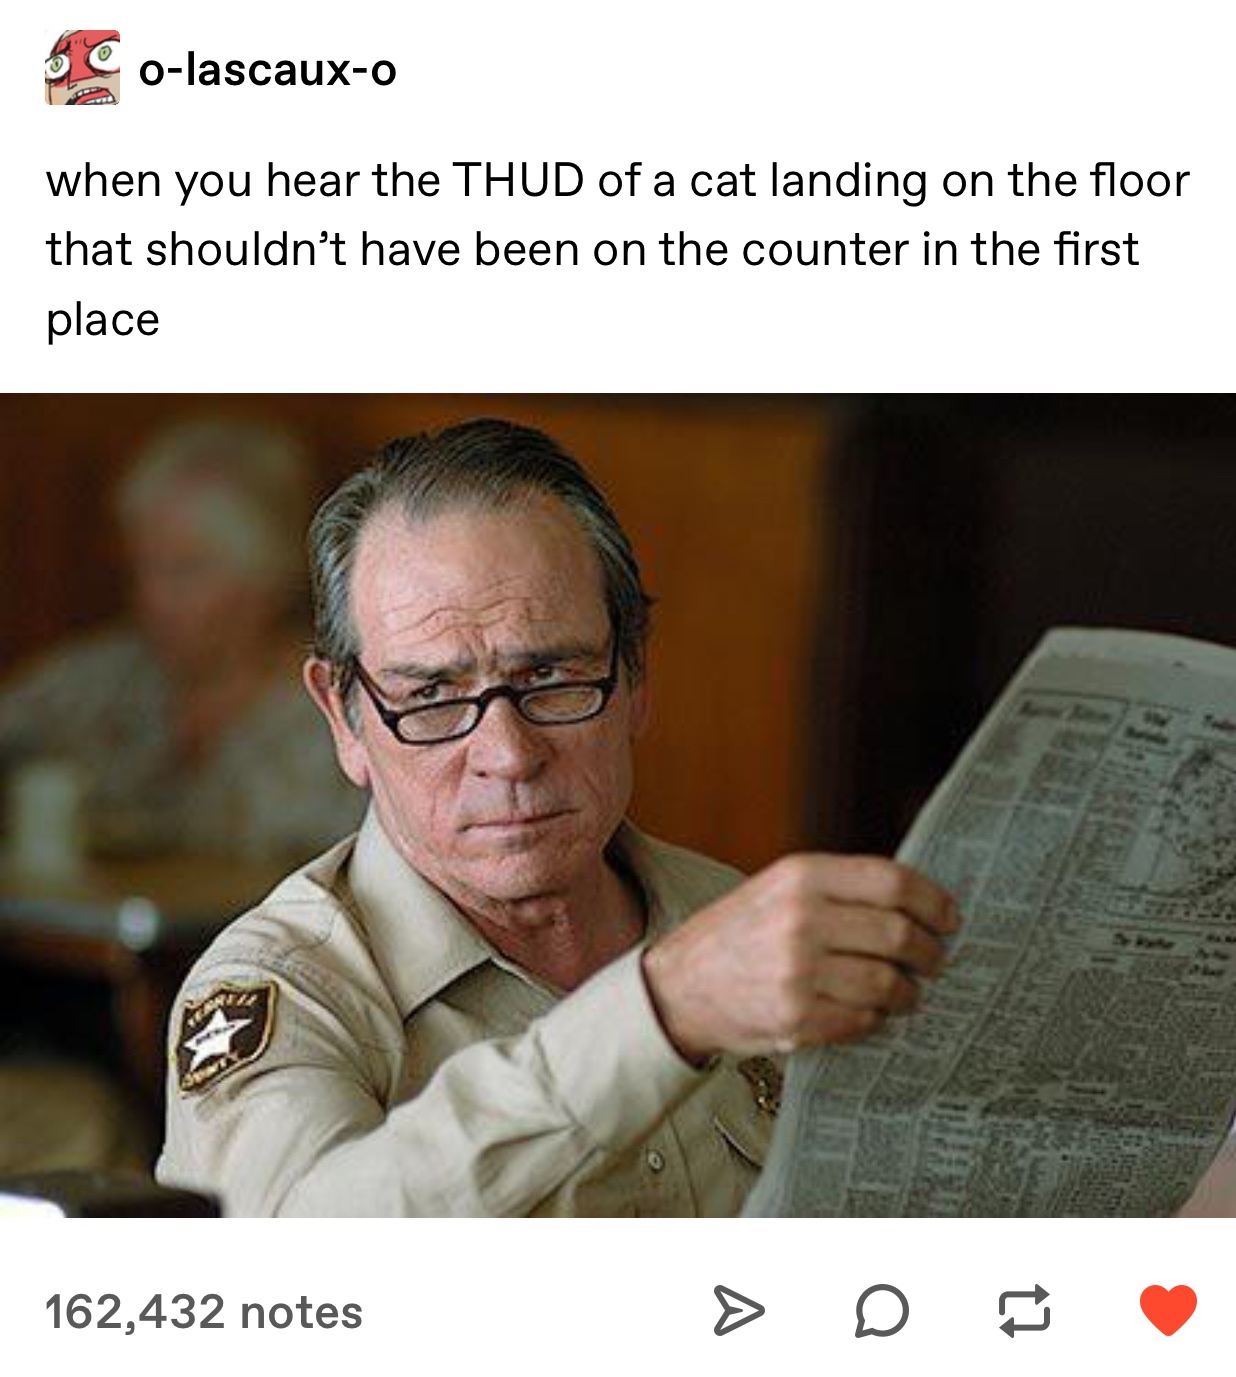 tommy lee jones newspaper - Colascauxo when you hear the Thud of a cat landing on the floor that shouldn't have been on the counter in the first place 162,432 notes > D